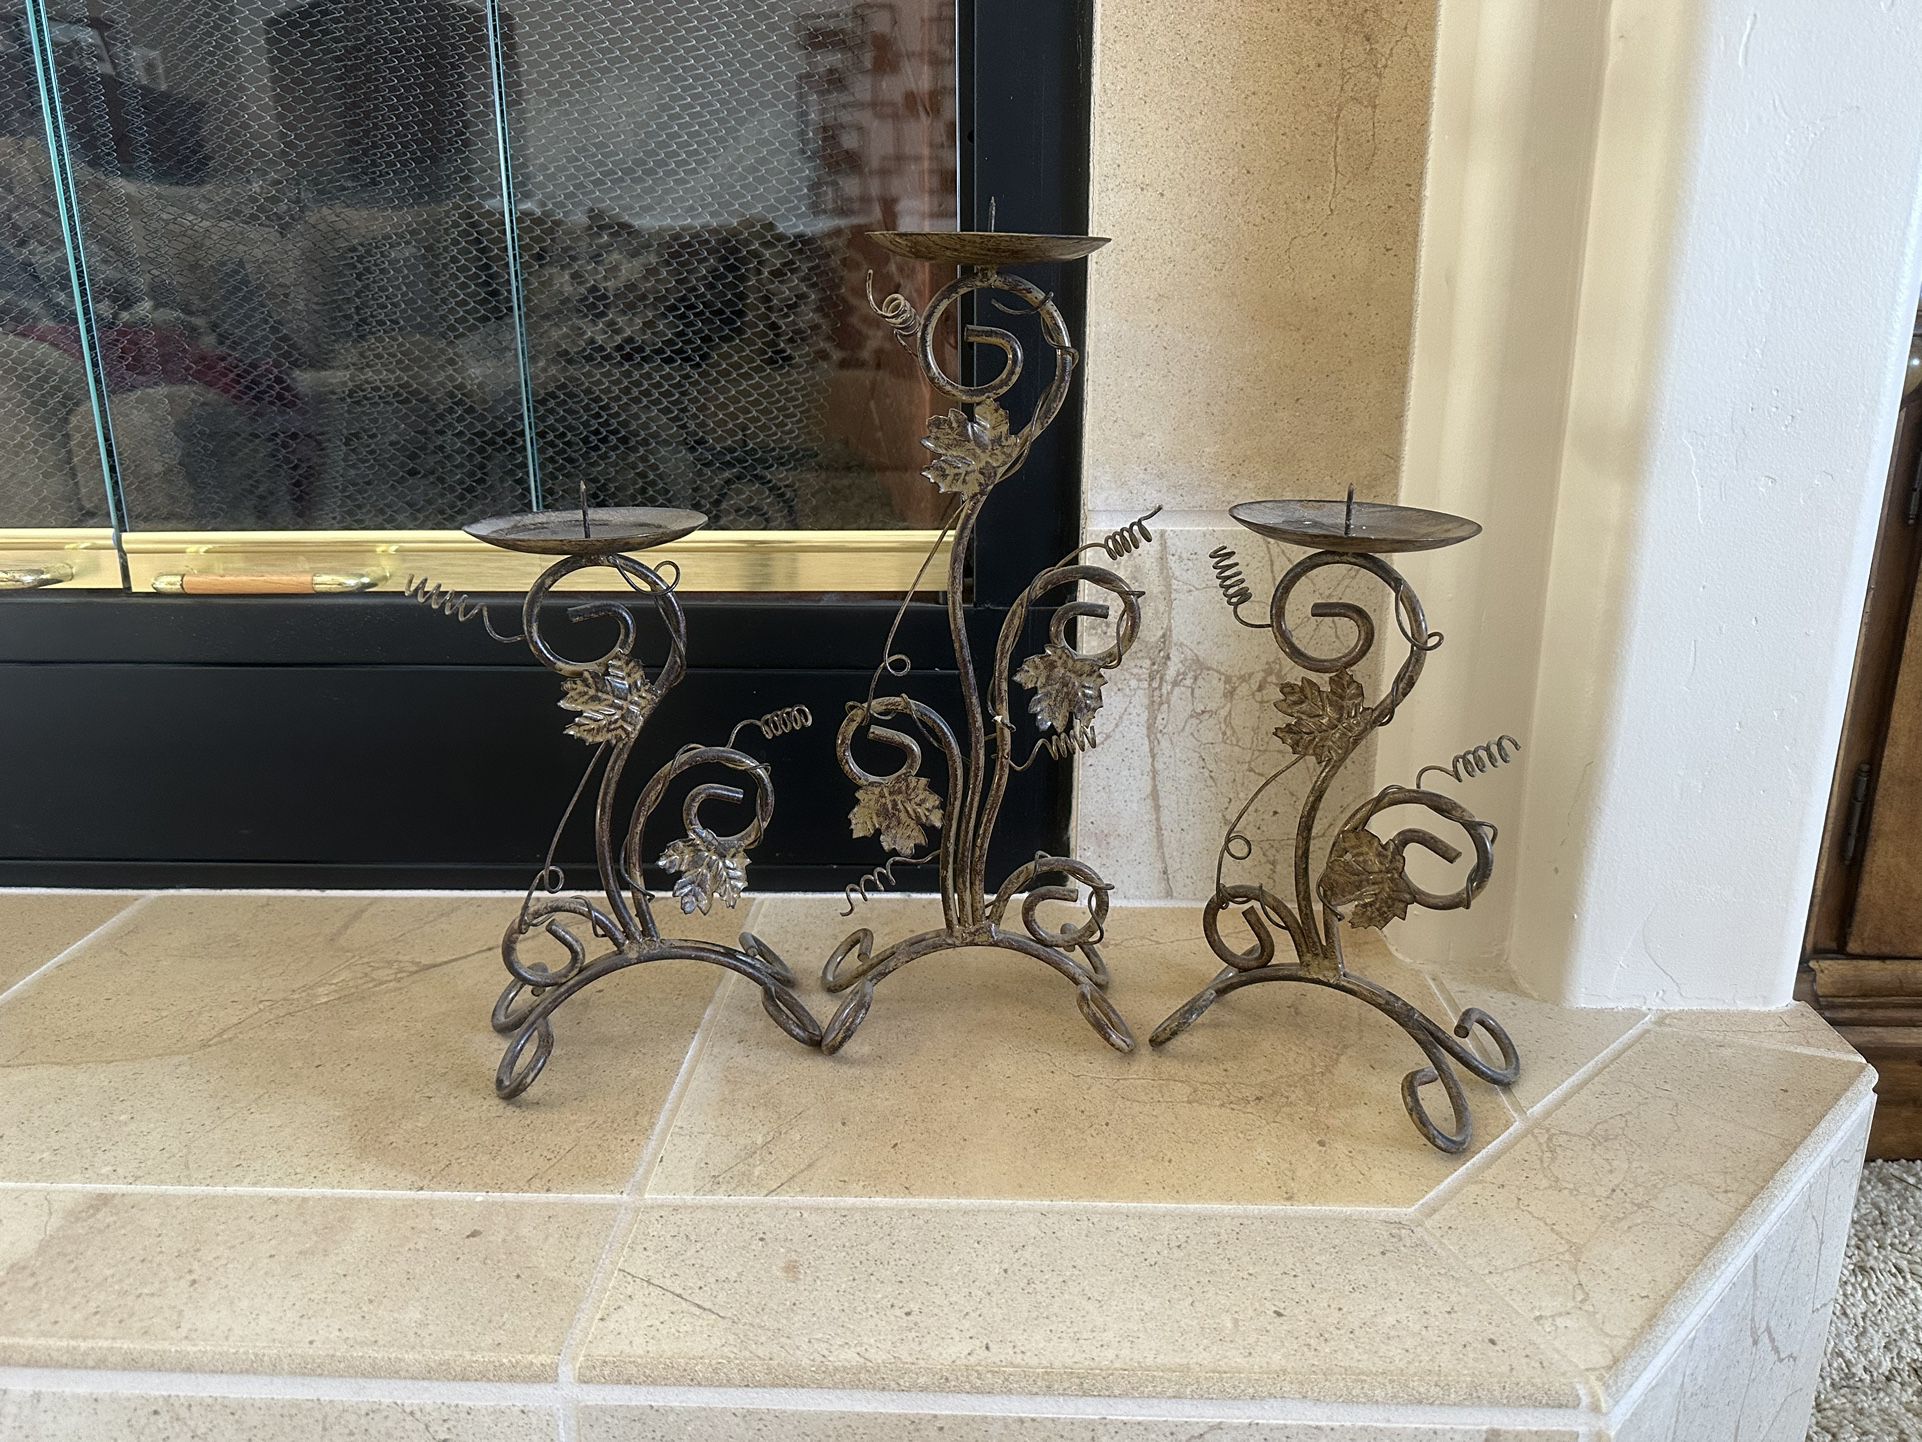 Candle Holders Set Of 3